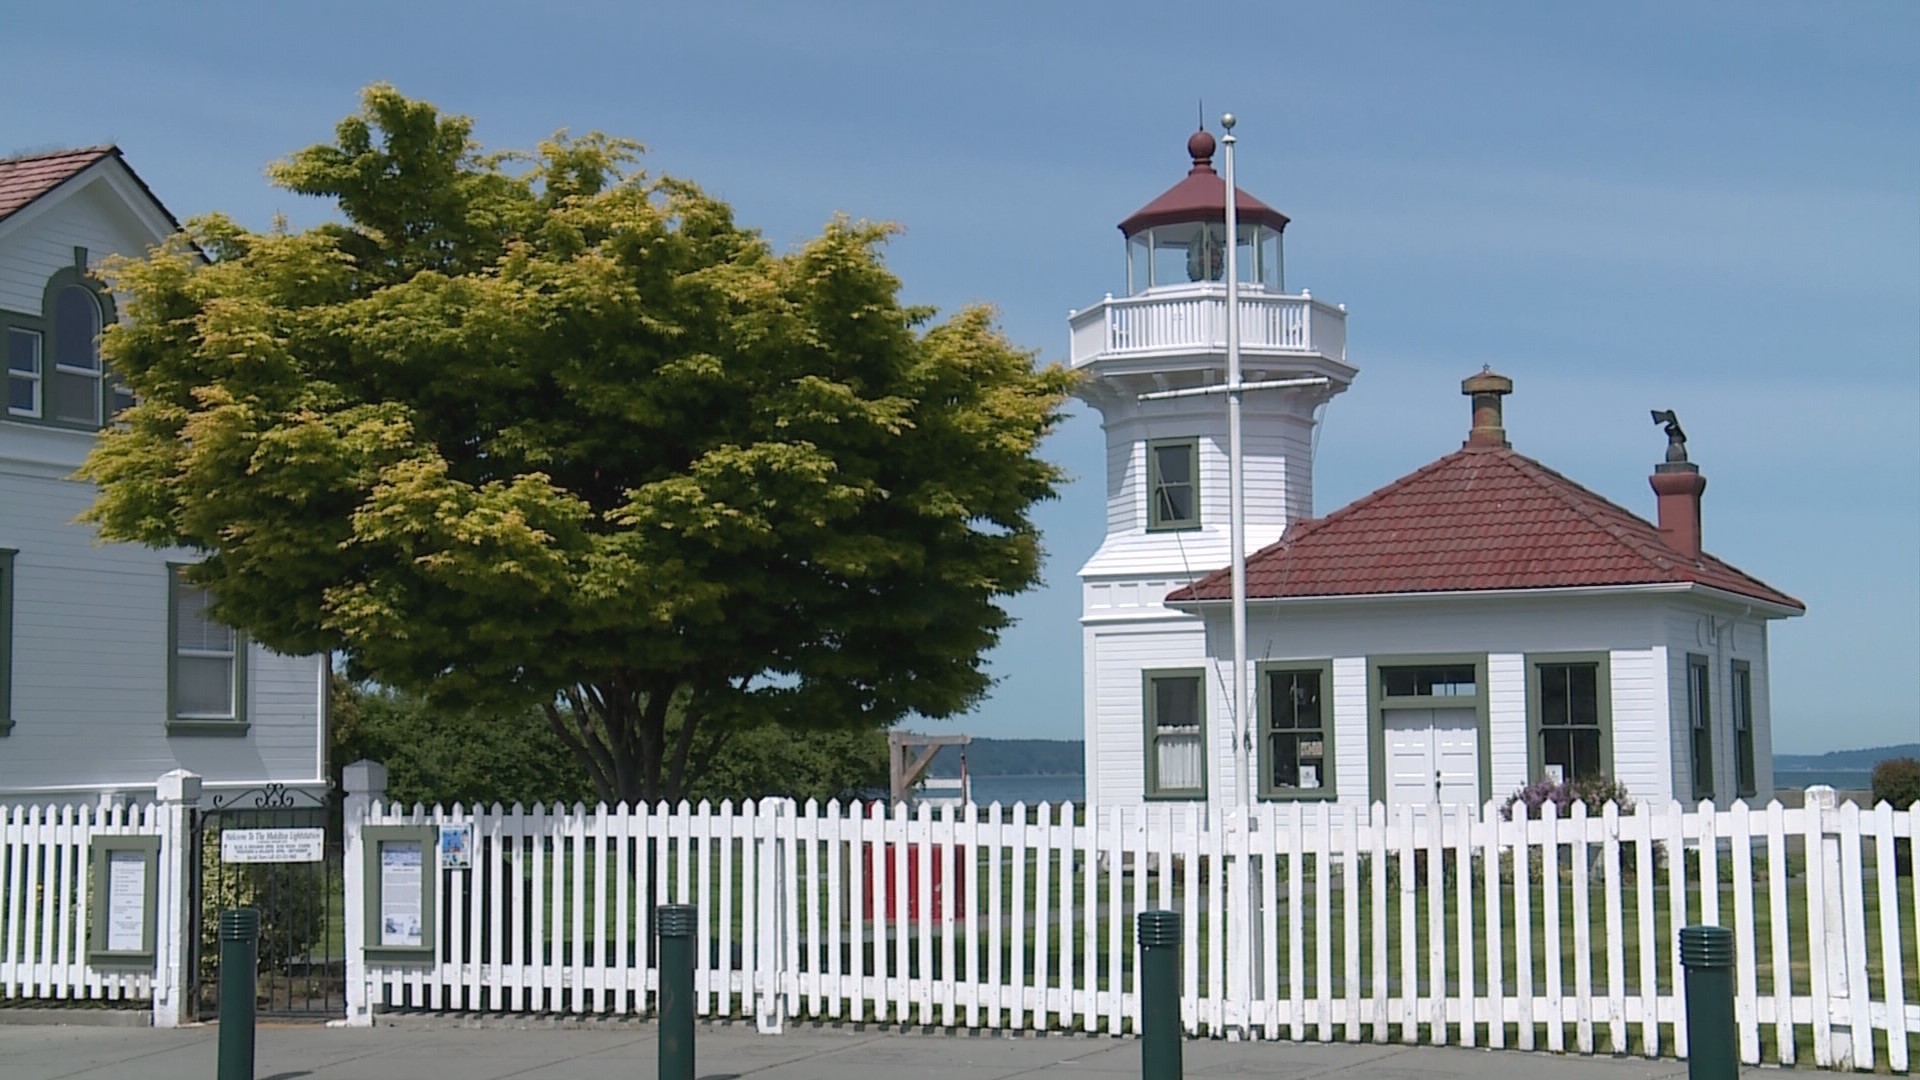 It's a quiet beach town that's a perfect escape from the Seattle city buzz. Sponsored by Windermere Real Estate.